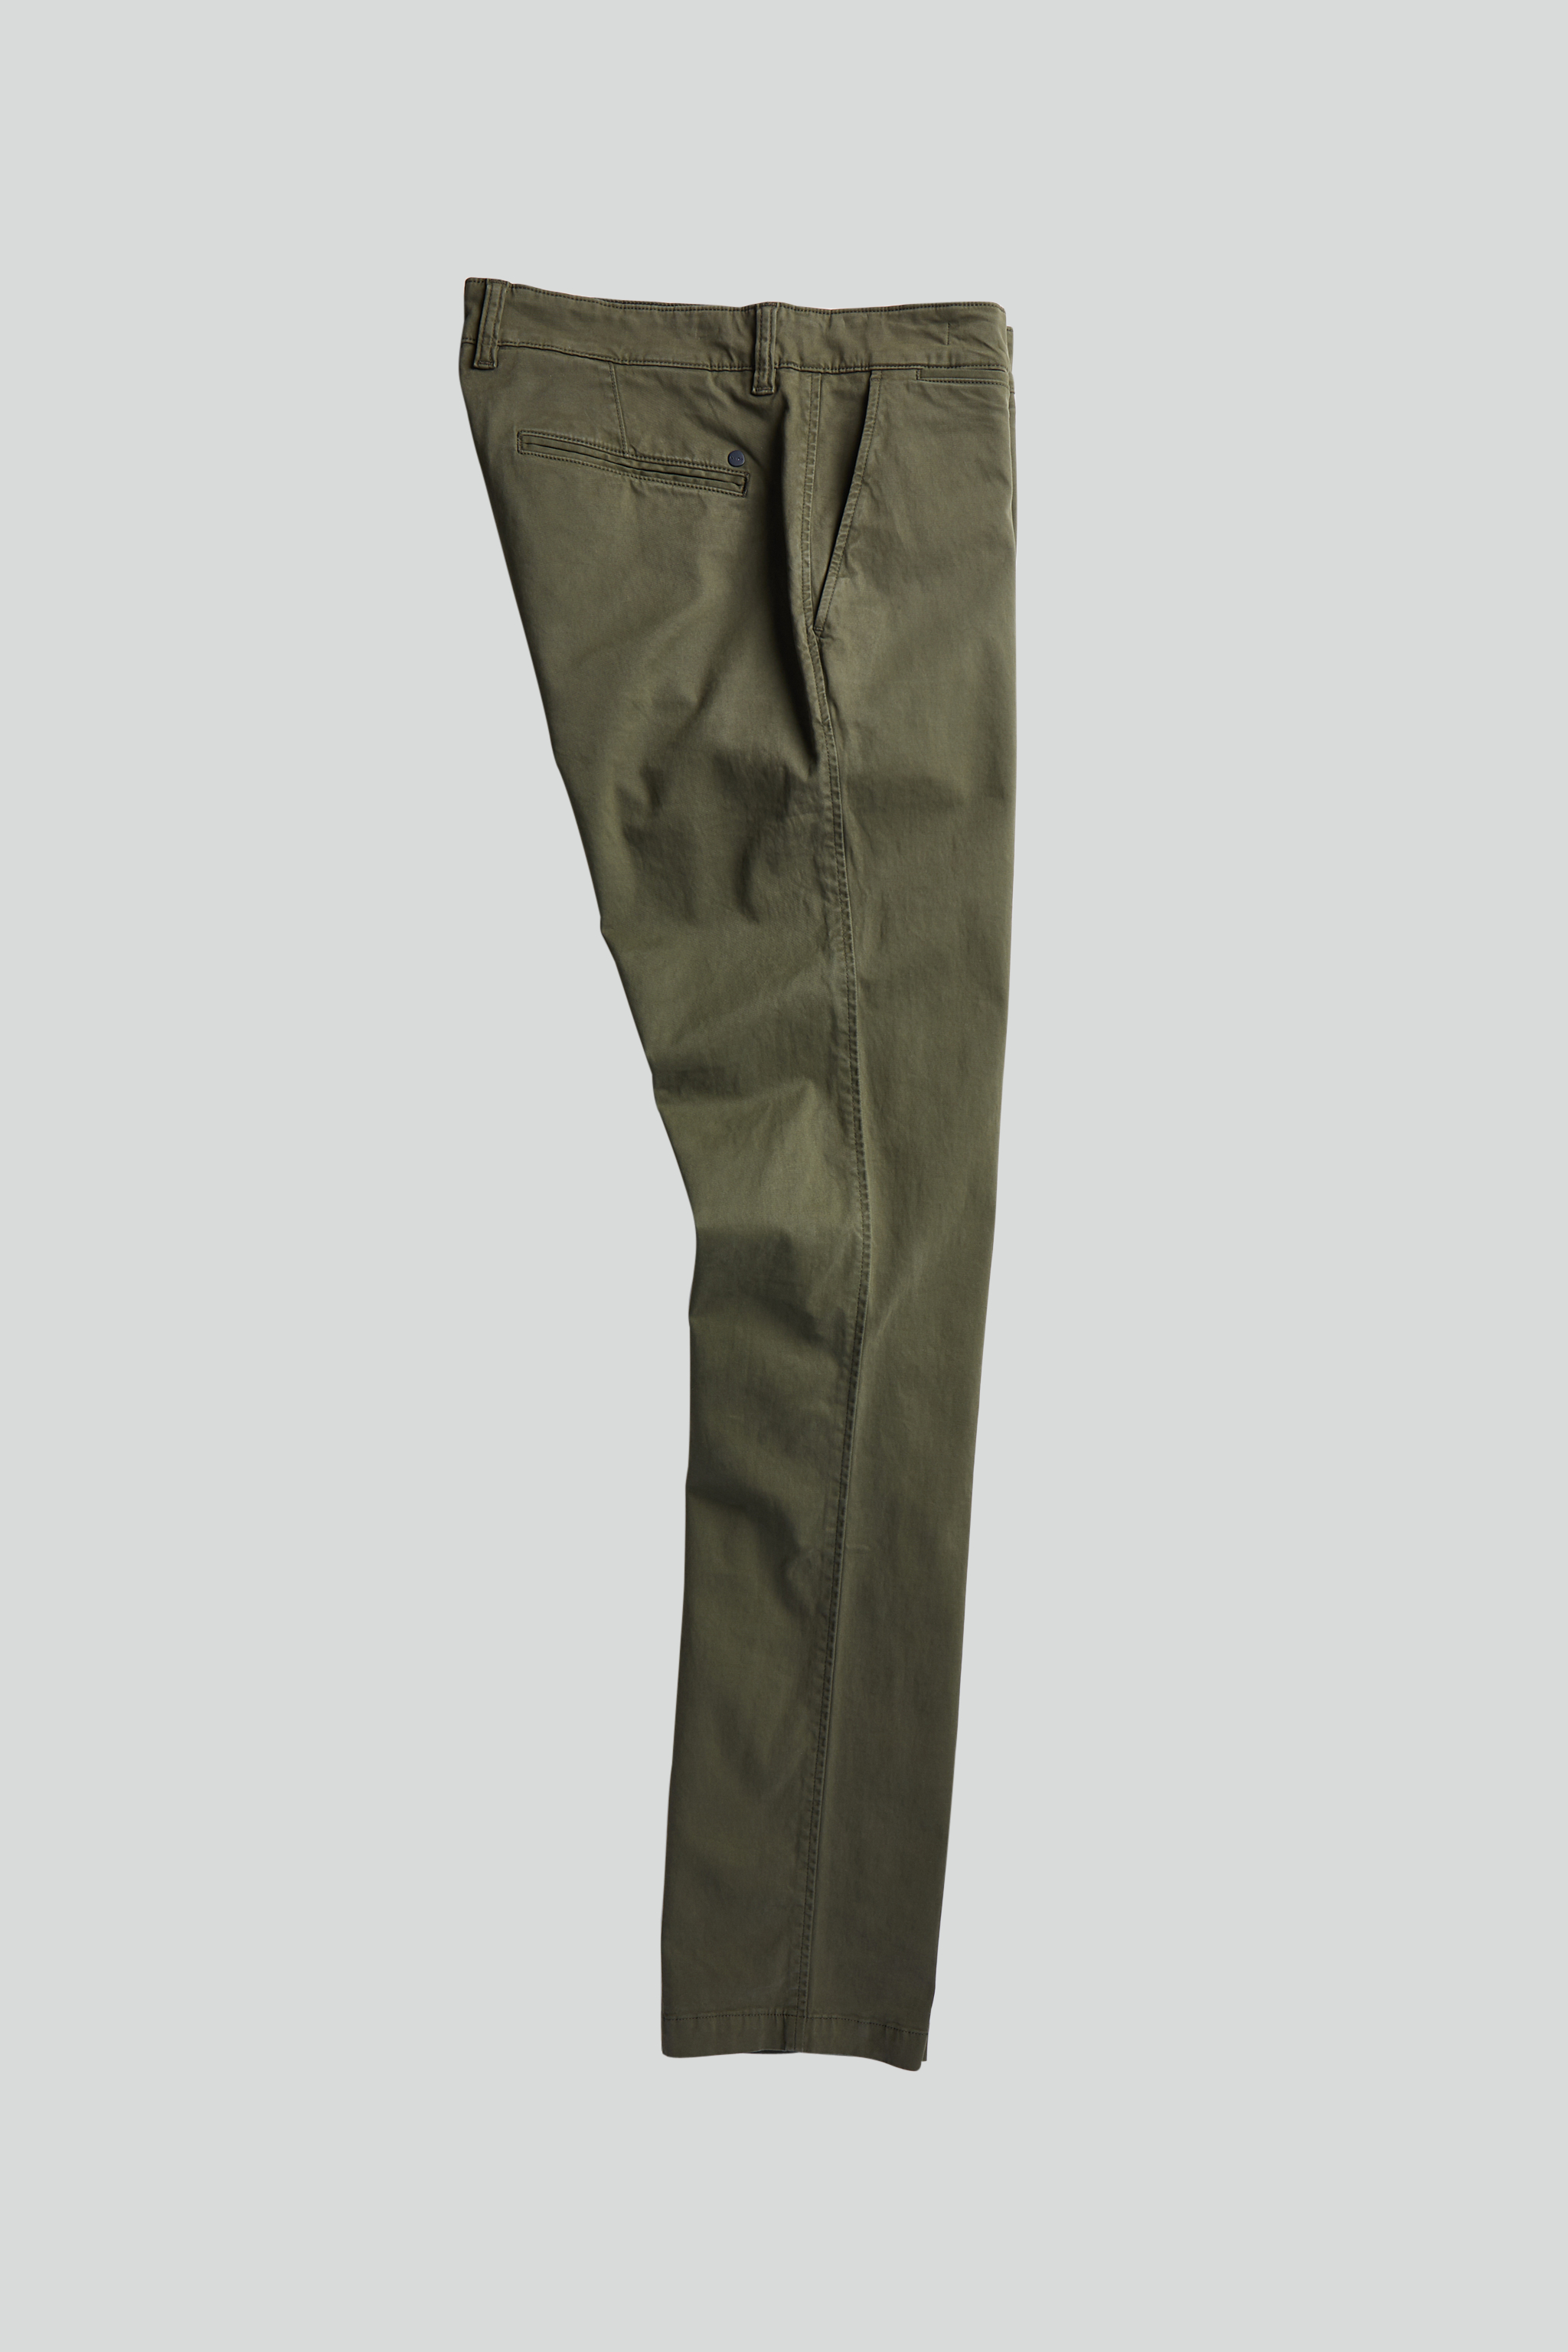 Marco 1400 men's chinos - Green - Buy online at NN07®